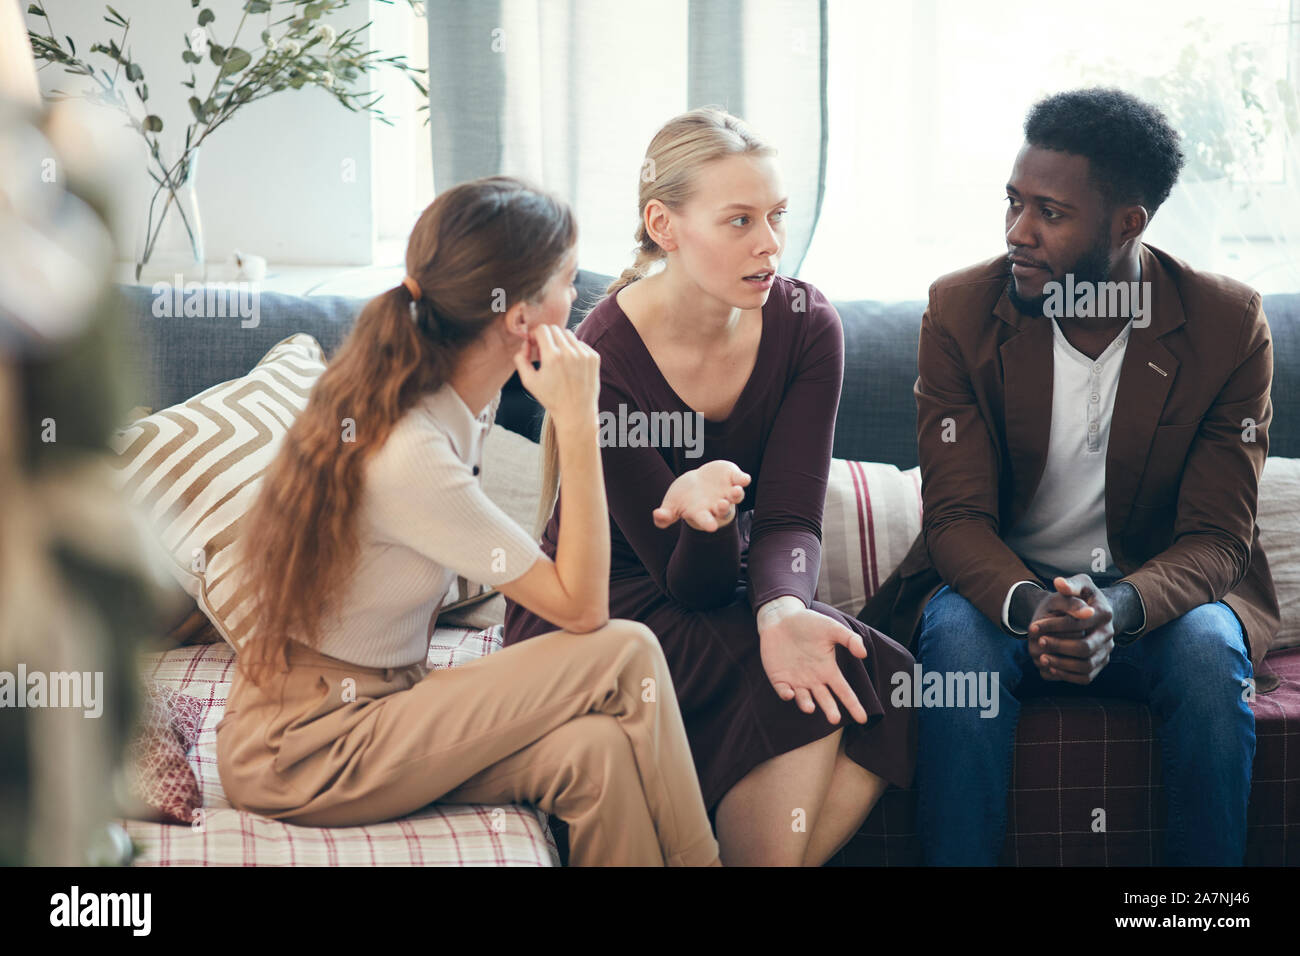 Group of modern young people talking to each other while sitting on cozy sofa and sharing stories, copy space Stock Photo